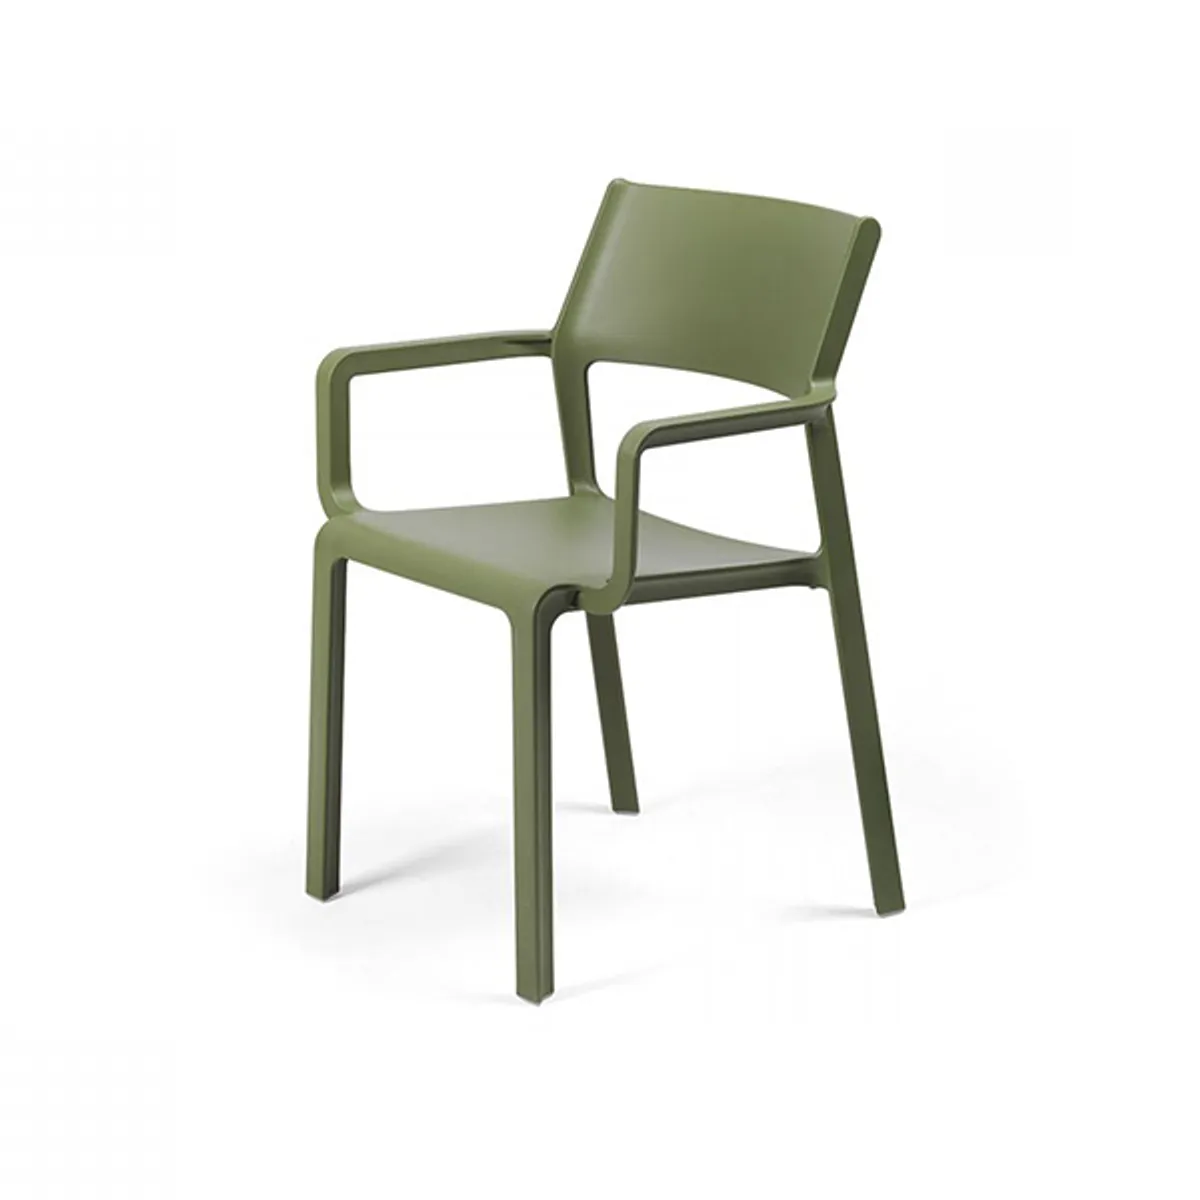 Trill Armchair Fibreglass Furniture For Exterior Commercial Use